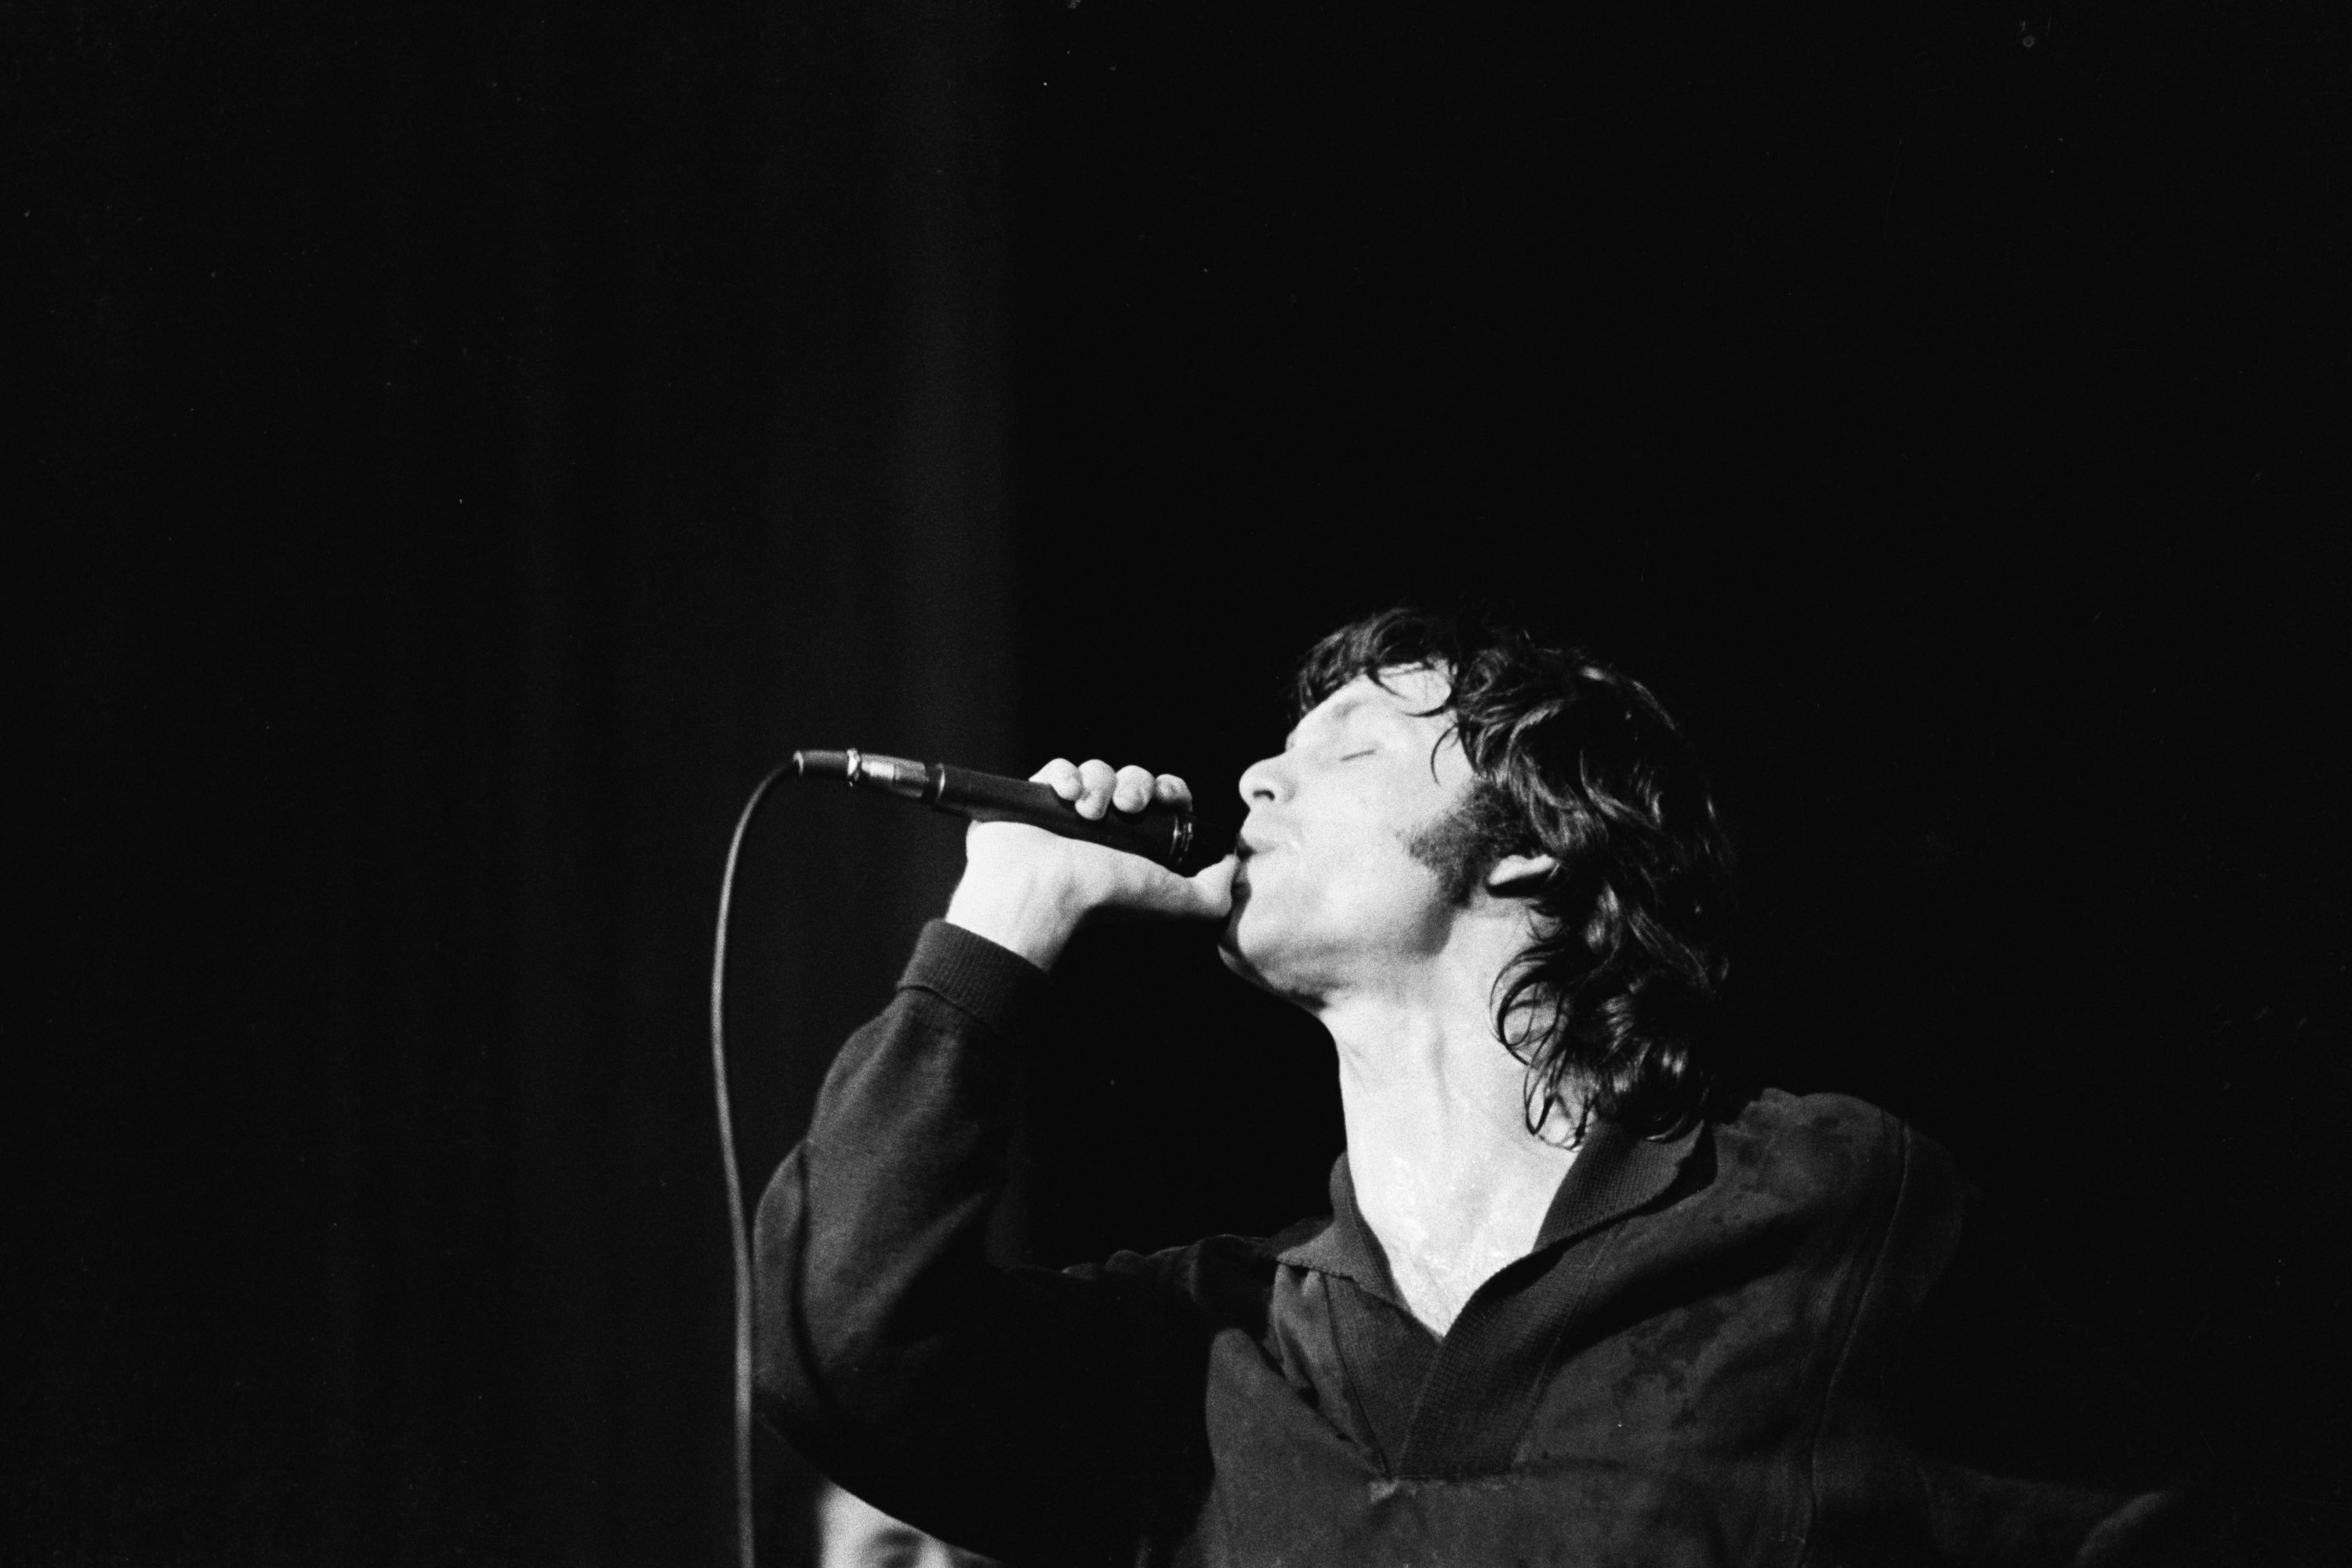 American Rock singer Jim Morrison (1943 - 1971), of the group the Doors, performs onstage at Town Hall, Philadelphia, Pennsylvania, June 18, 1967. | Source: Getty Images